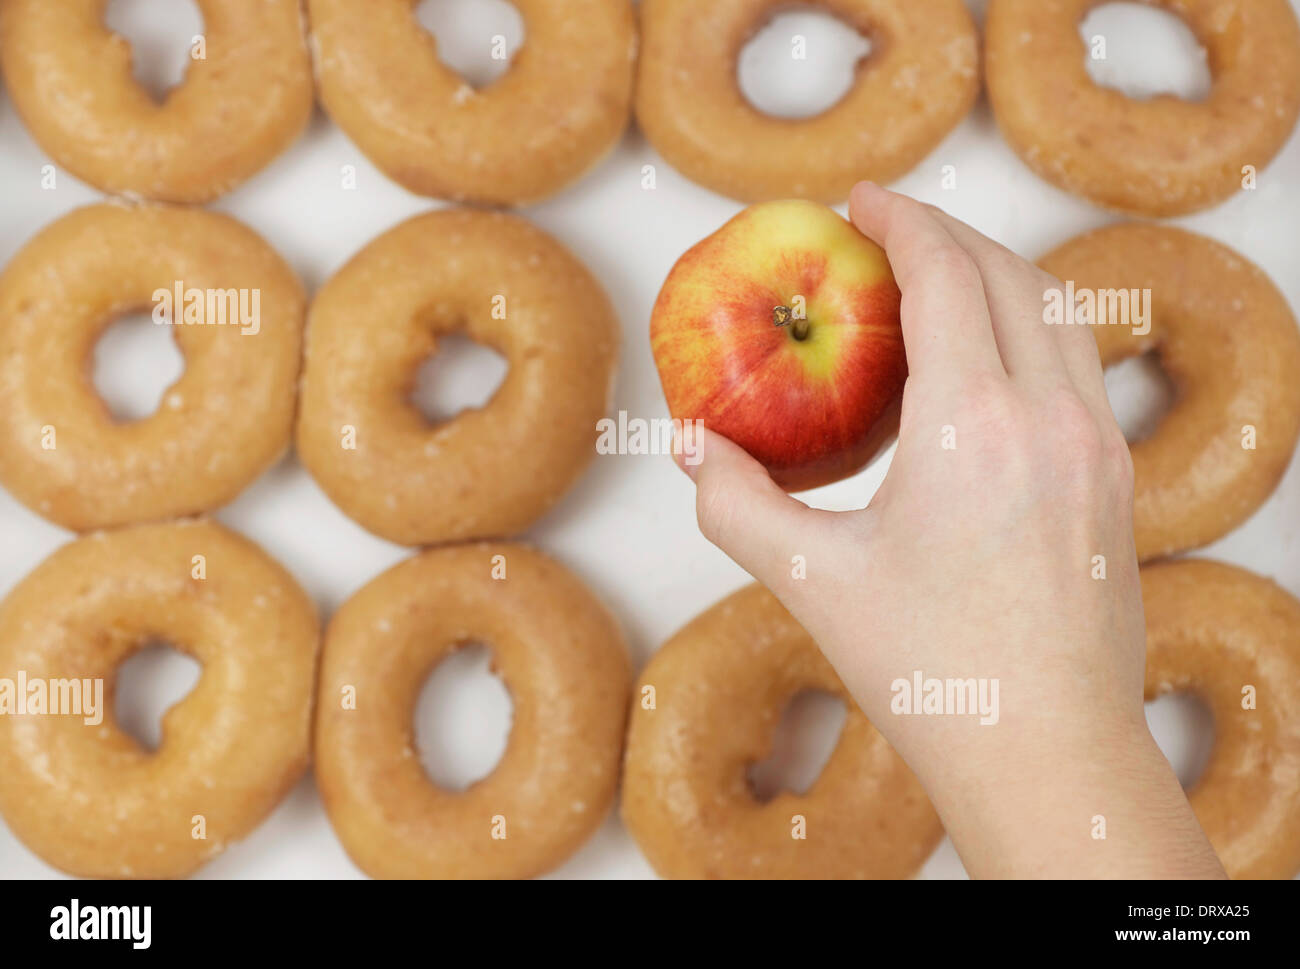 A dozen glazed donuts with an apple that is being picked or chosen by a right hand. Stock Photo